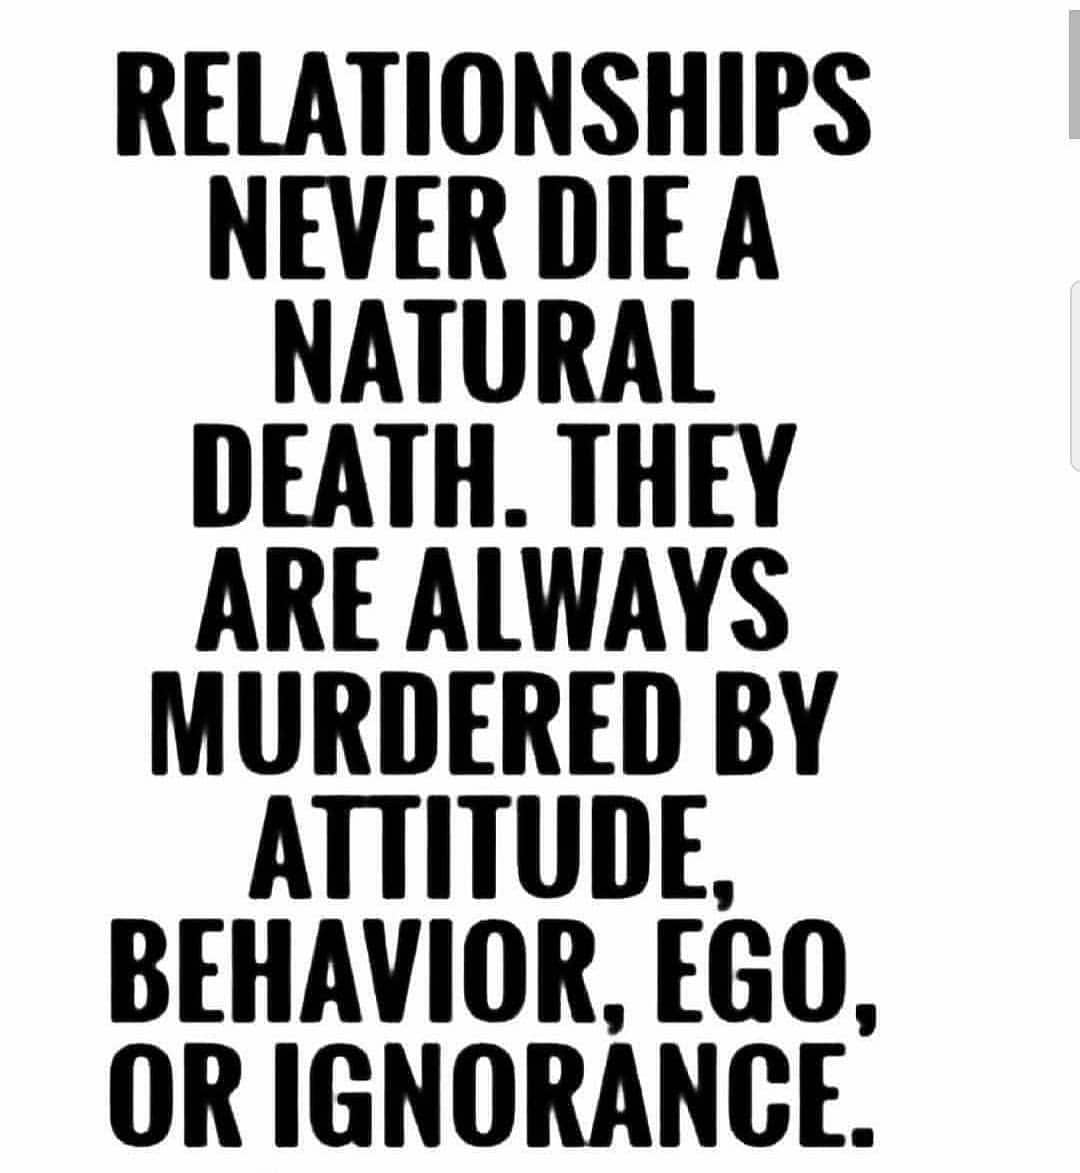 Relationships never die a natural death. They are always murdered by attitude, behavior, ego, or ignorance.